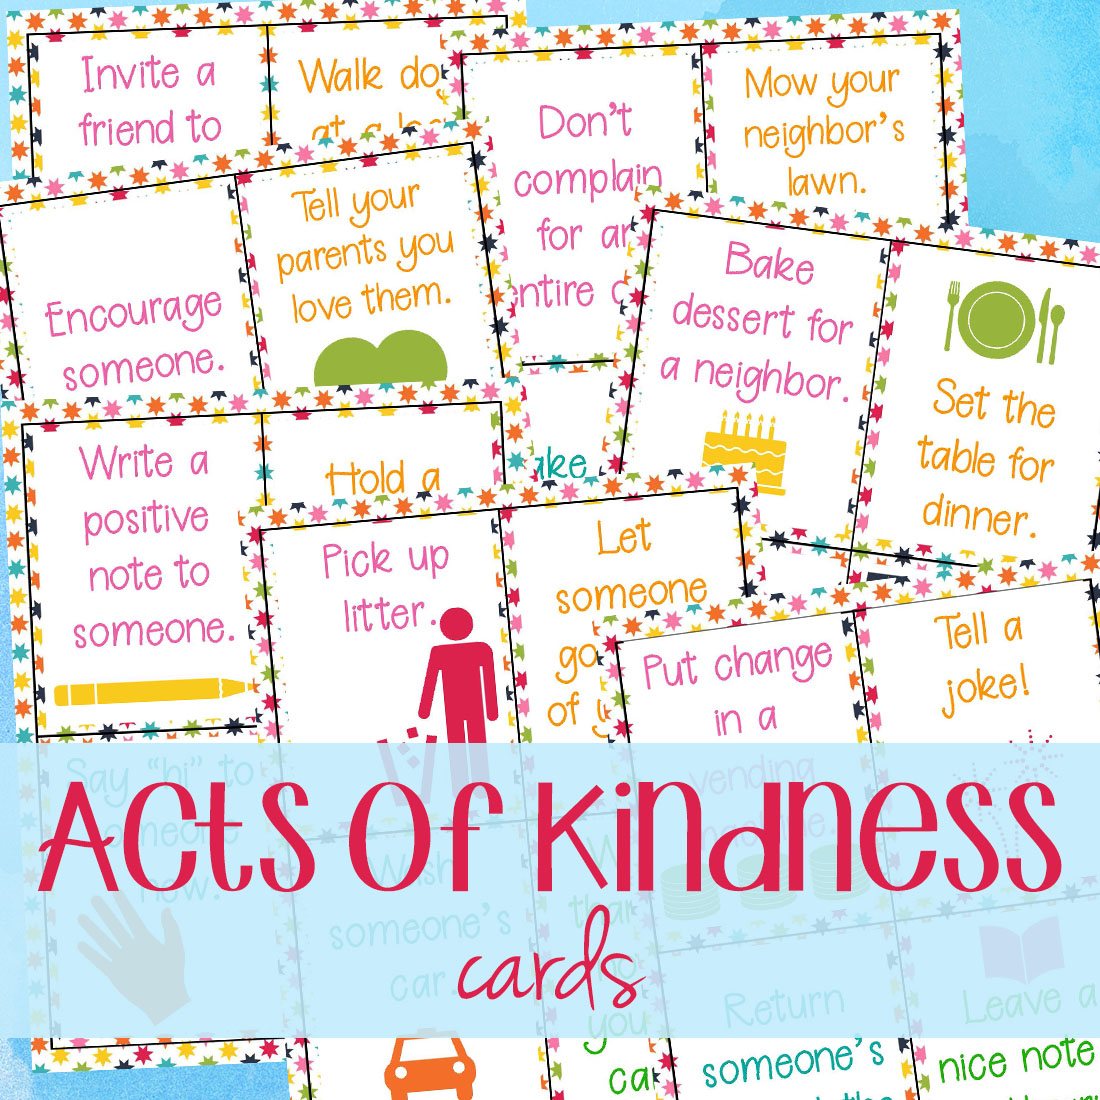 25+ Random Acts of Kindness Ideas for School that can help teachers, students, and parents spread kindness. Random Acts of Kindness, Free Random Acts of Kindness Printable, and acts of kindness for kids